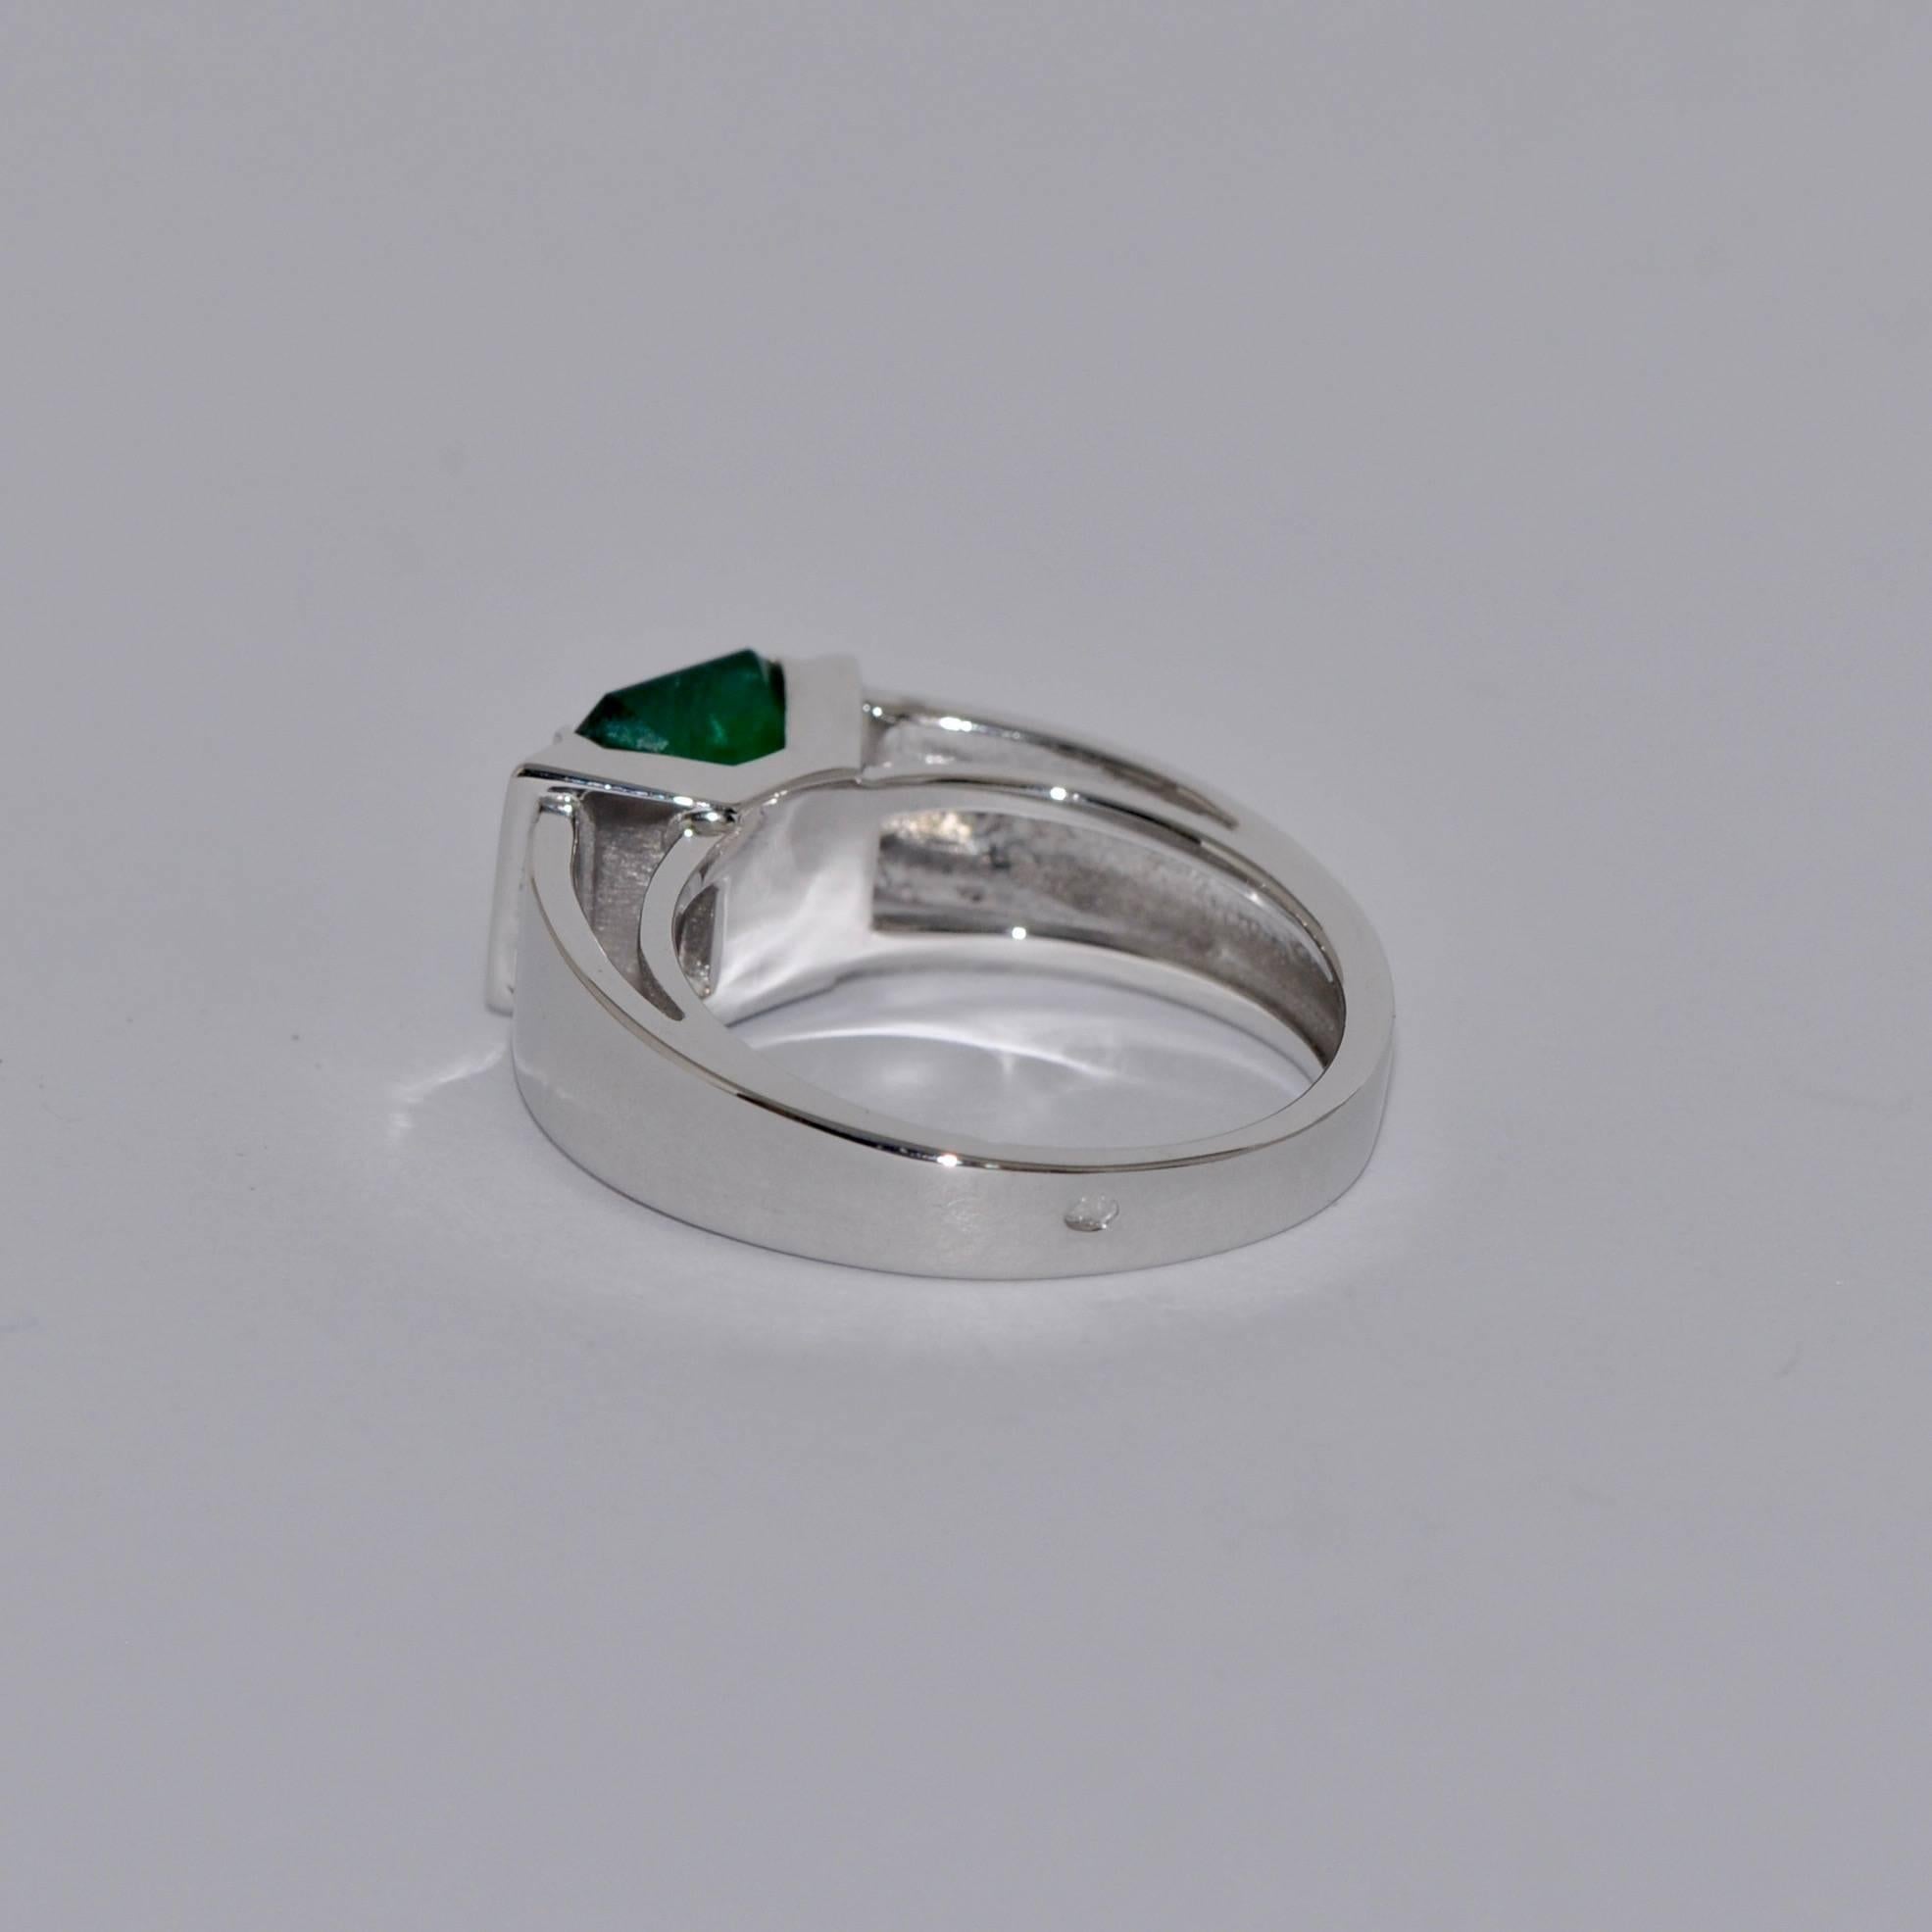 Discover this Emerald and Diamonds White Gold Engagement Ring.
Emerald Shaped Emerald 2.32 Carat 8*6
8 Diamonds Brilliants 0.13 Carat
White Gold 18 Carat 
French Size 54
US Size 6 3/4